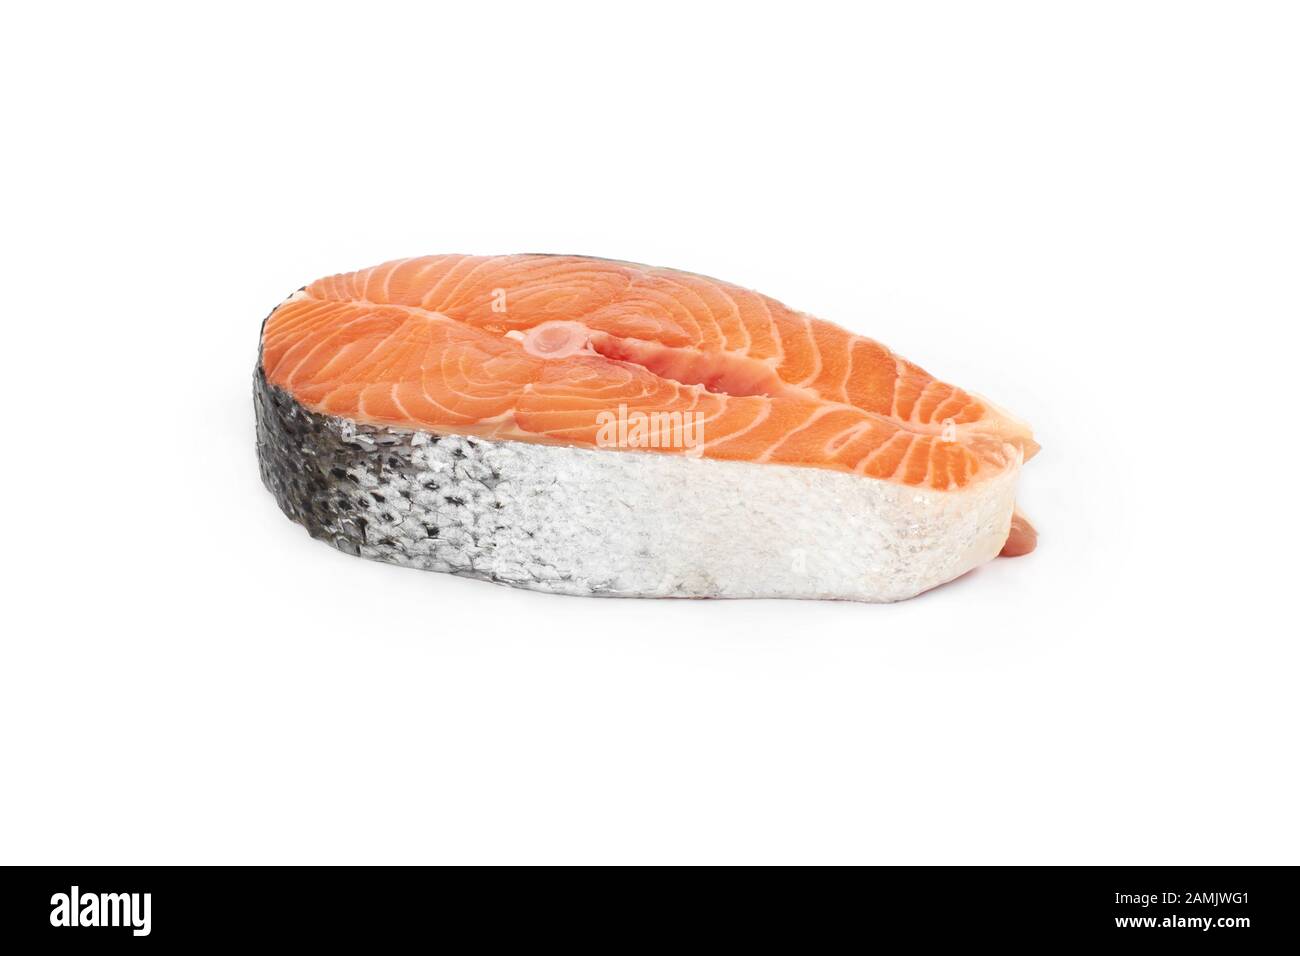 Slice of red fish salmon isolated on white background. Stock Photo